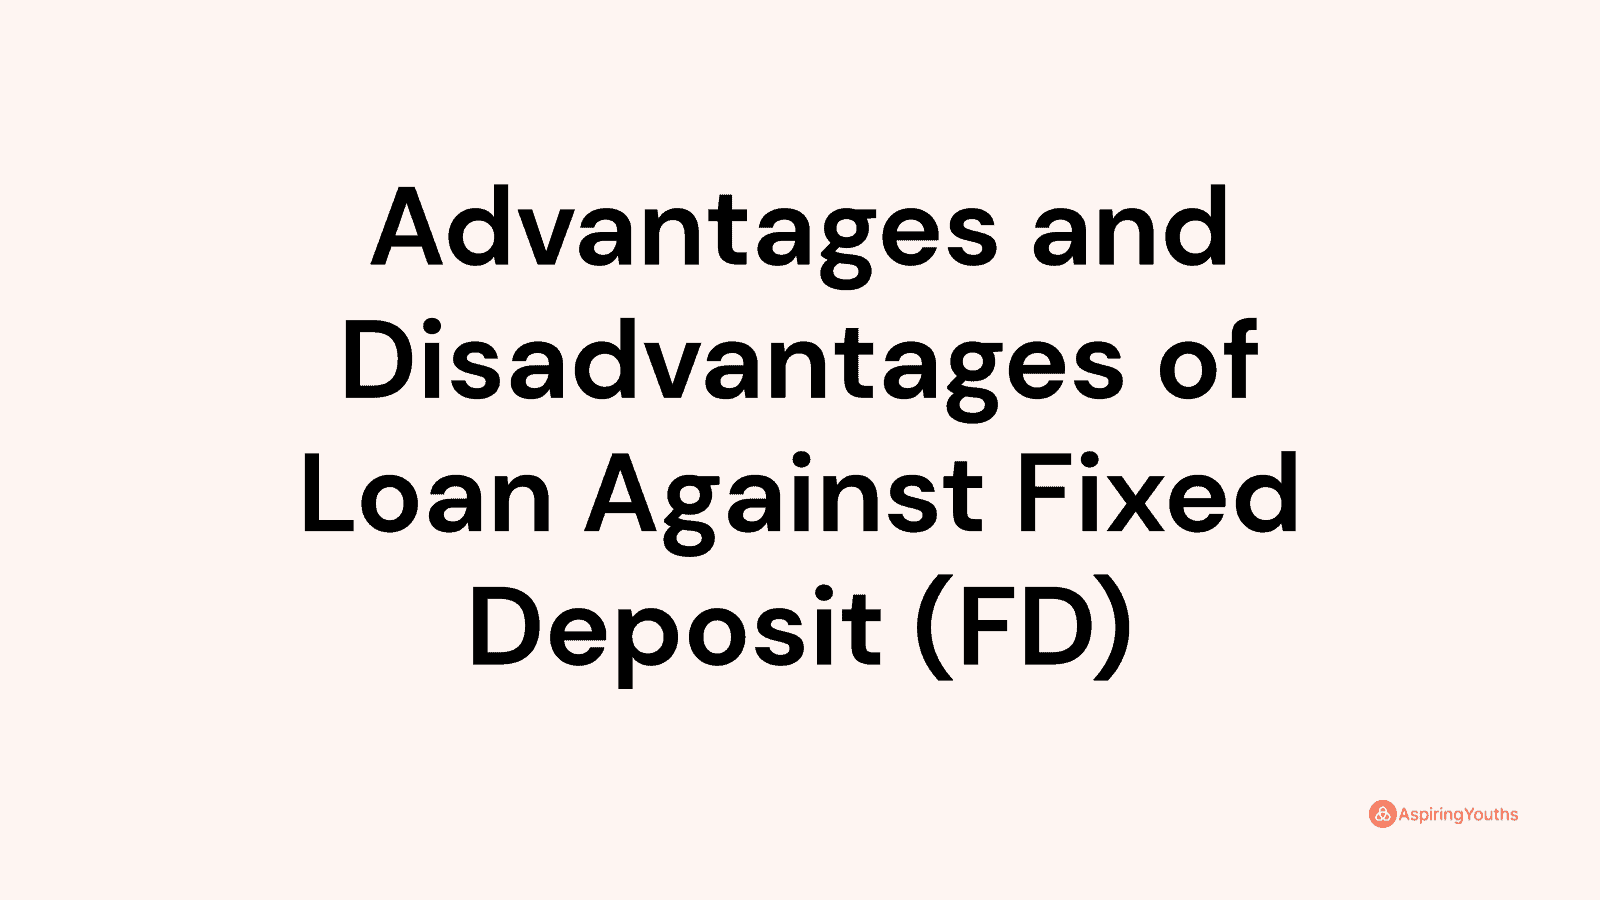 Advantages and disadvantages of Loan Against Fixed Deposit (FD)